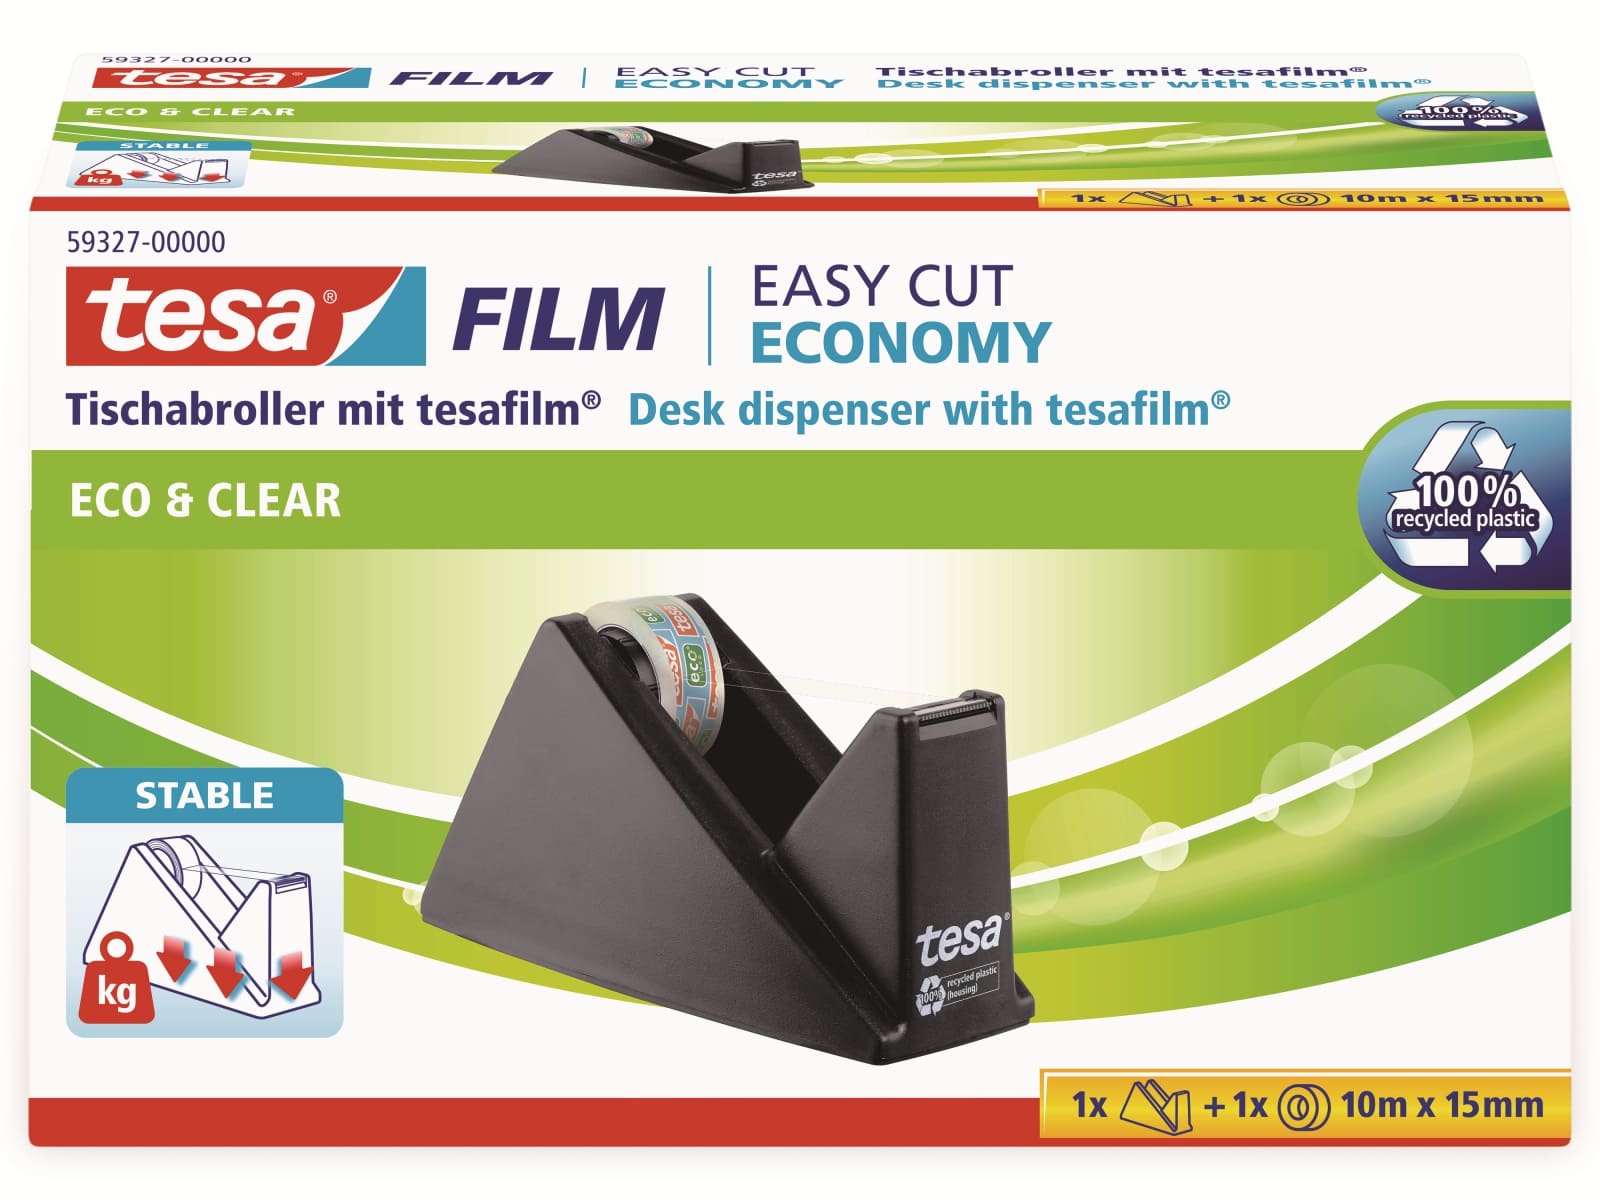 TESA film® Sparpack Abroller + film® eco&clear, 1 Rolle 10m:15mm, 59327-00000-02